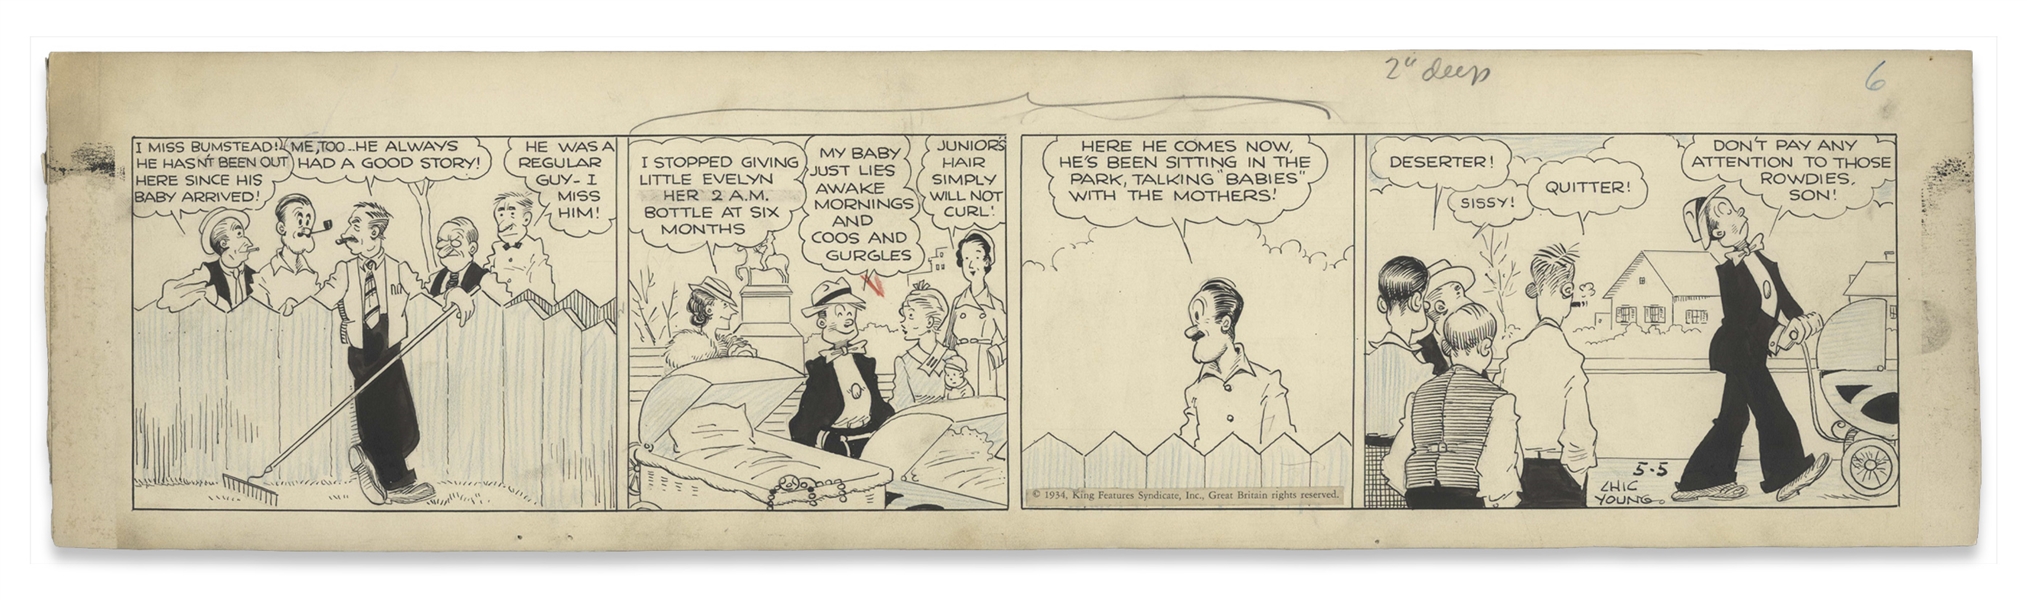 Chic Young Hand-Drawn ''Blondie'' Comic Strip From 1934 Titled ''That Old Guy of Mine'' -- Dagwood Takes Fatherhood Seriously